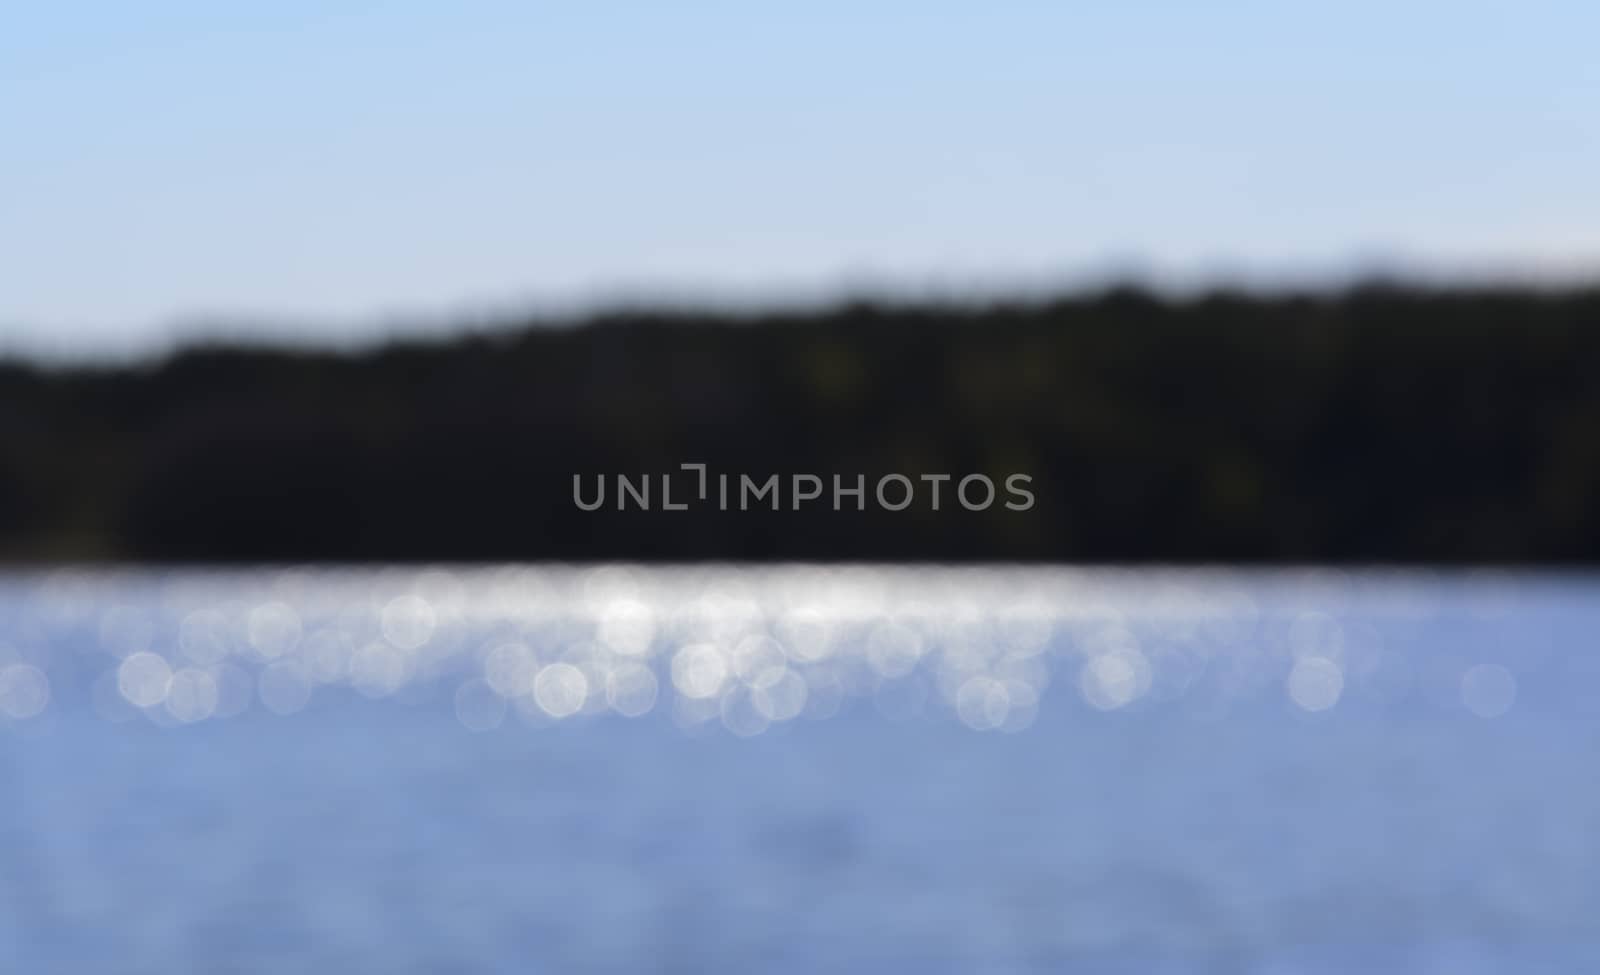 Sunshine on a lake and island blurry background, Lake Malaren, Stockholm, Sweden in May.